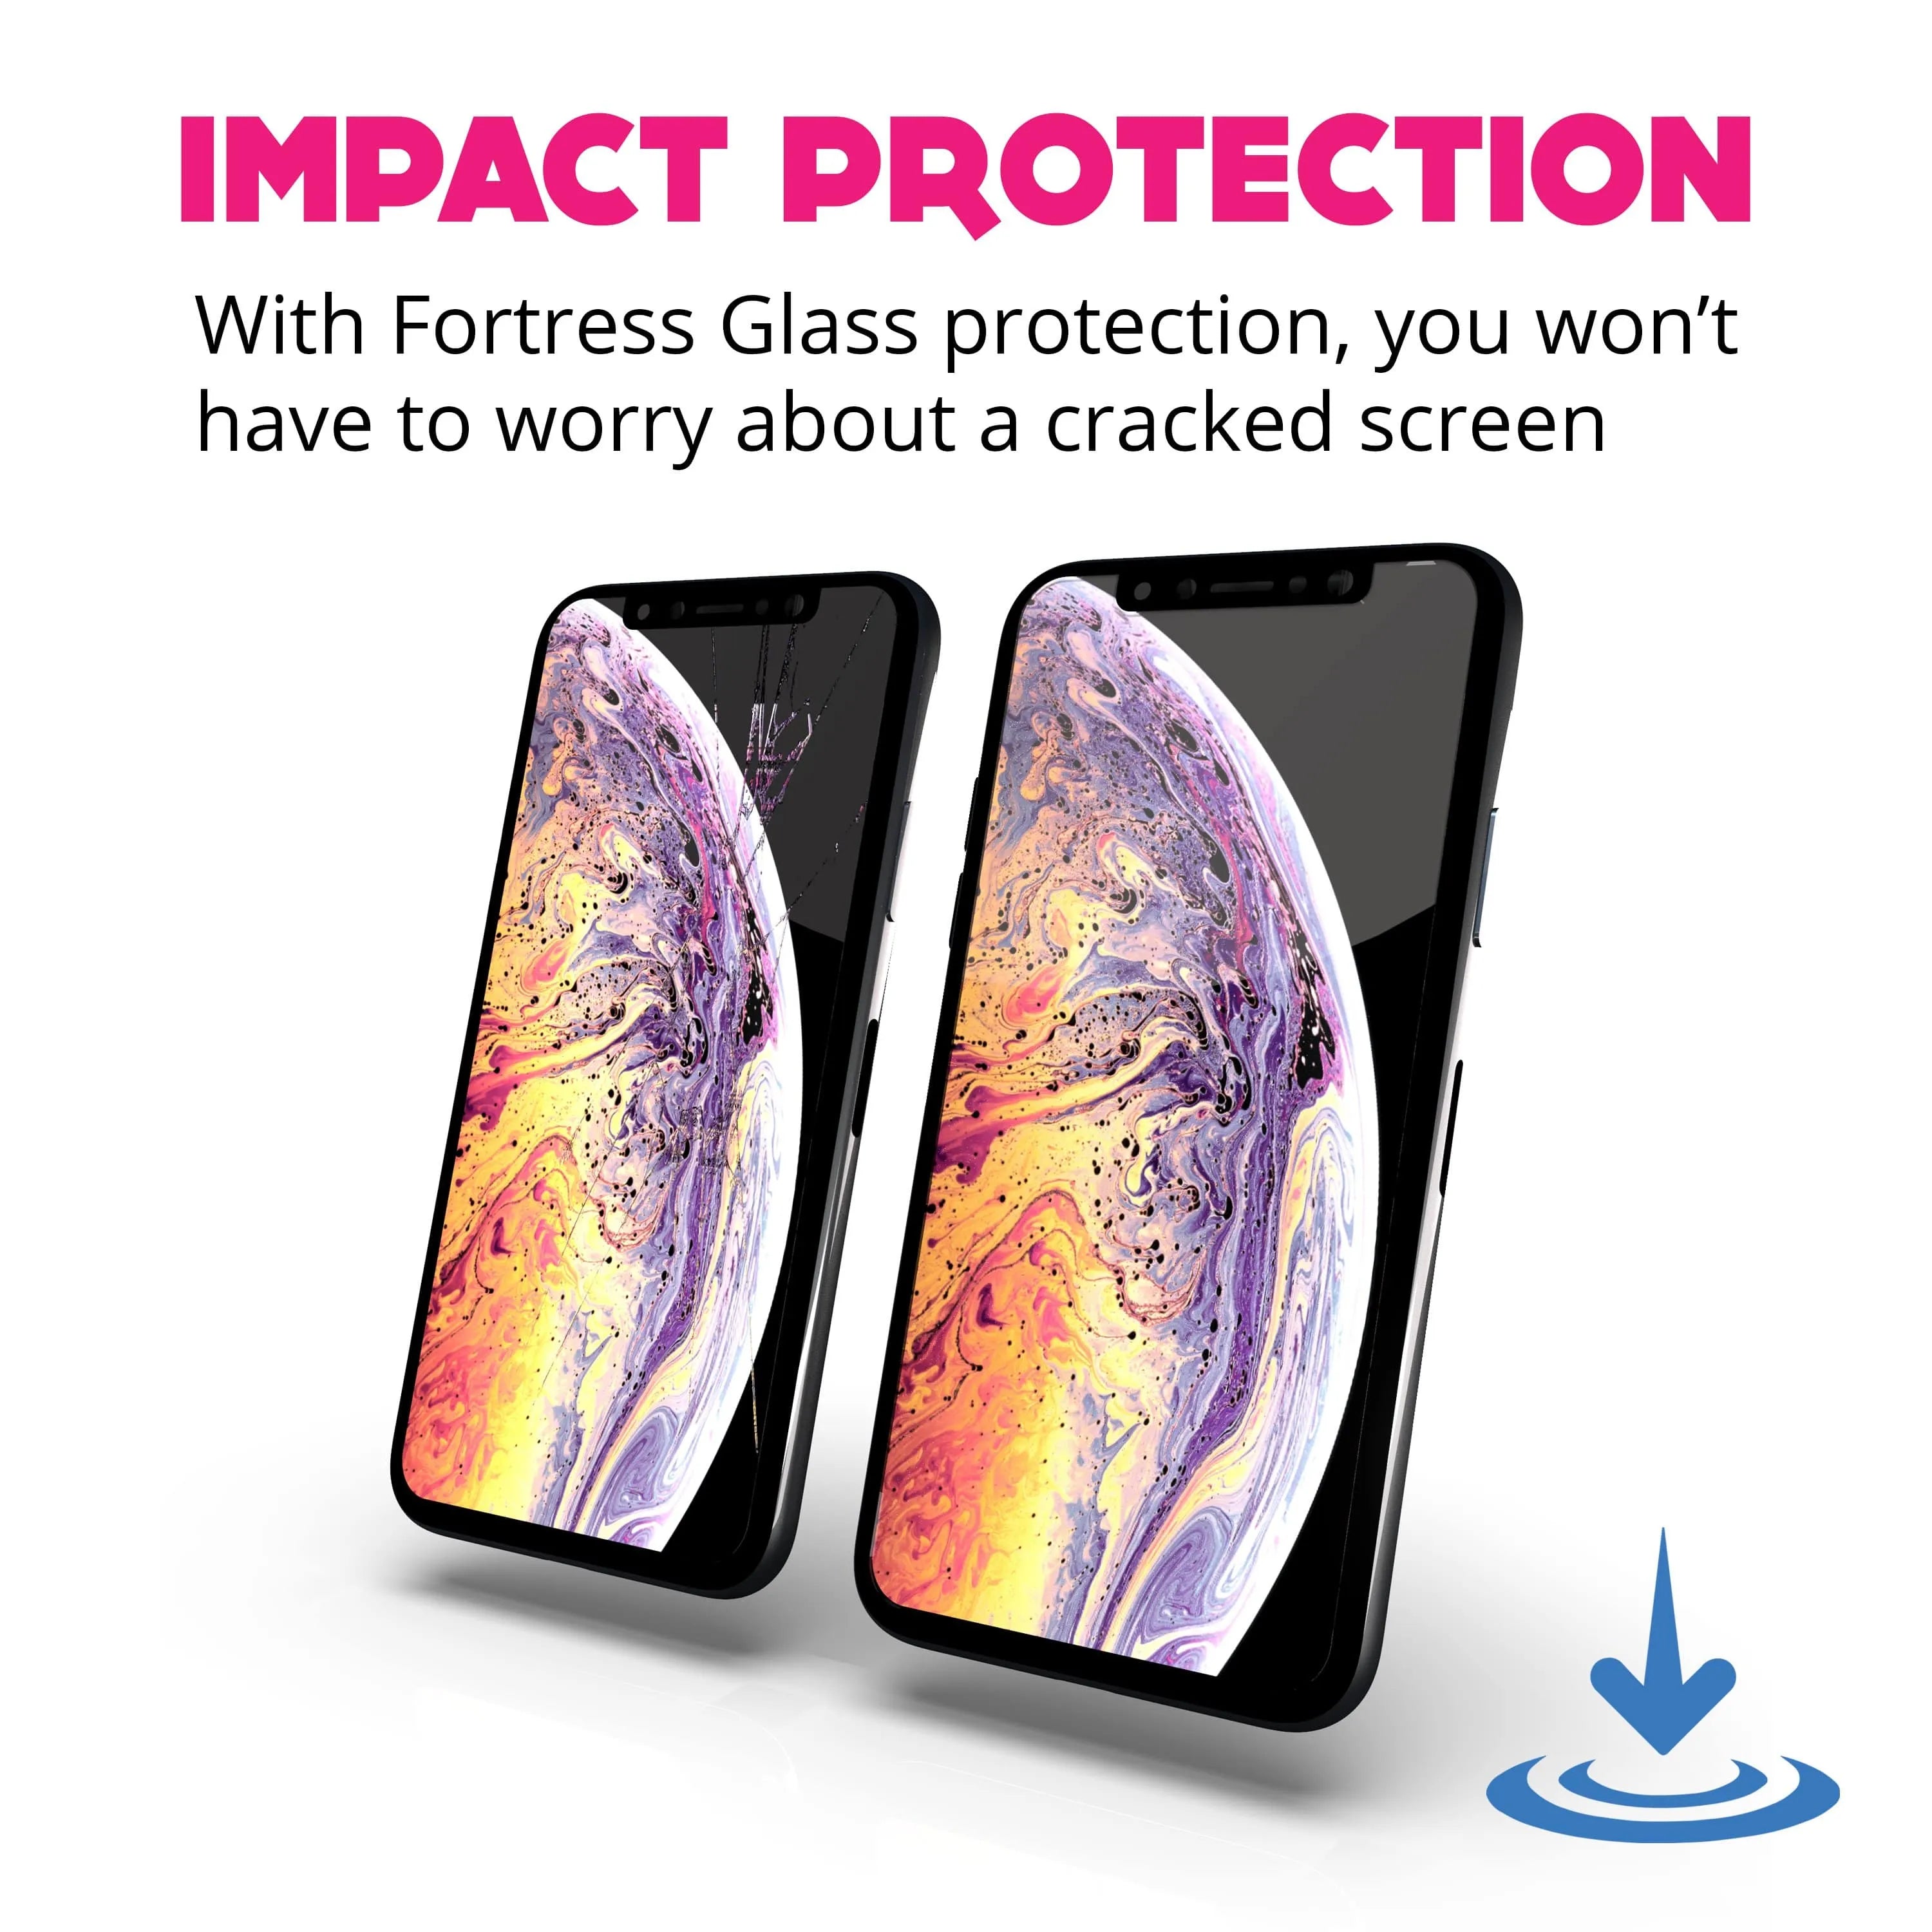 Fortress Samsung Galaxy S22 Screen Protector - $200 Device Coverage  Scooch Screen Protector